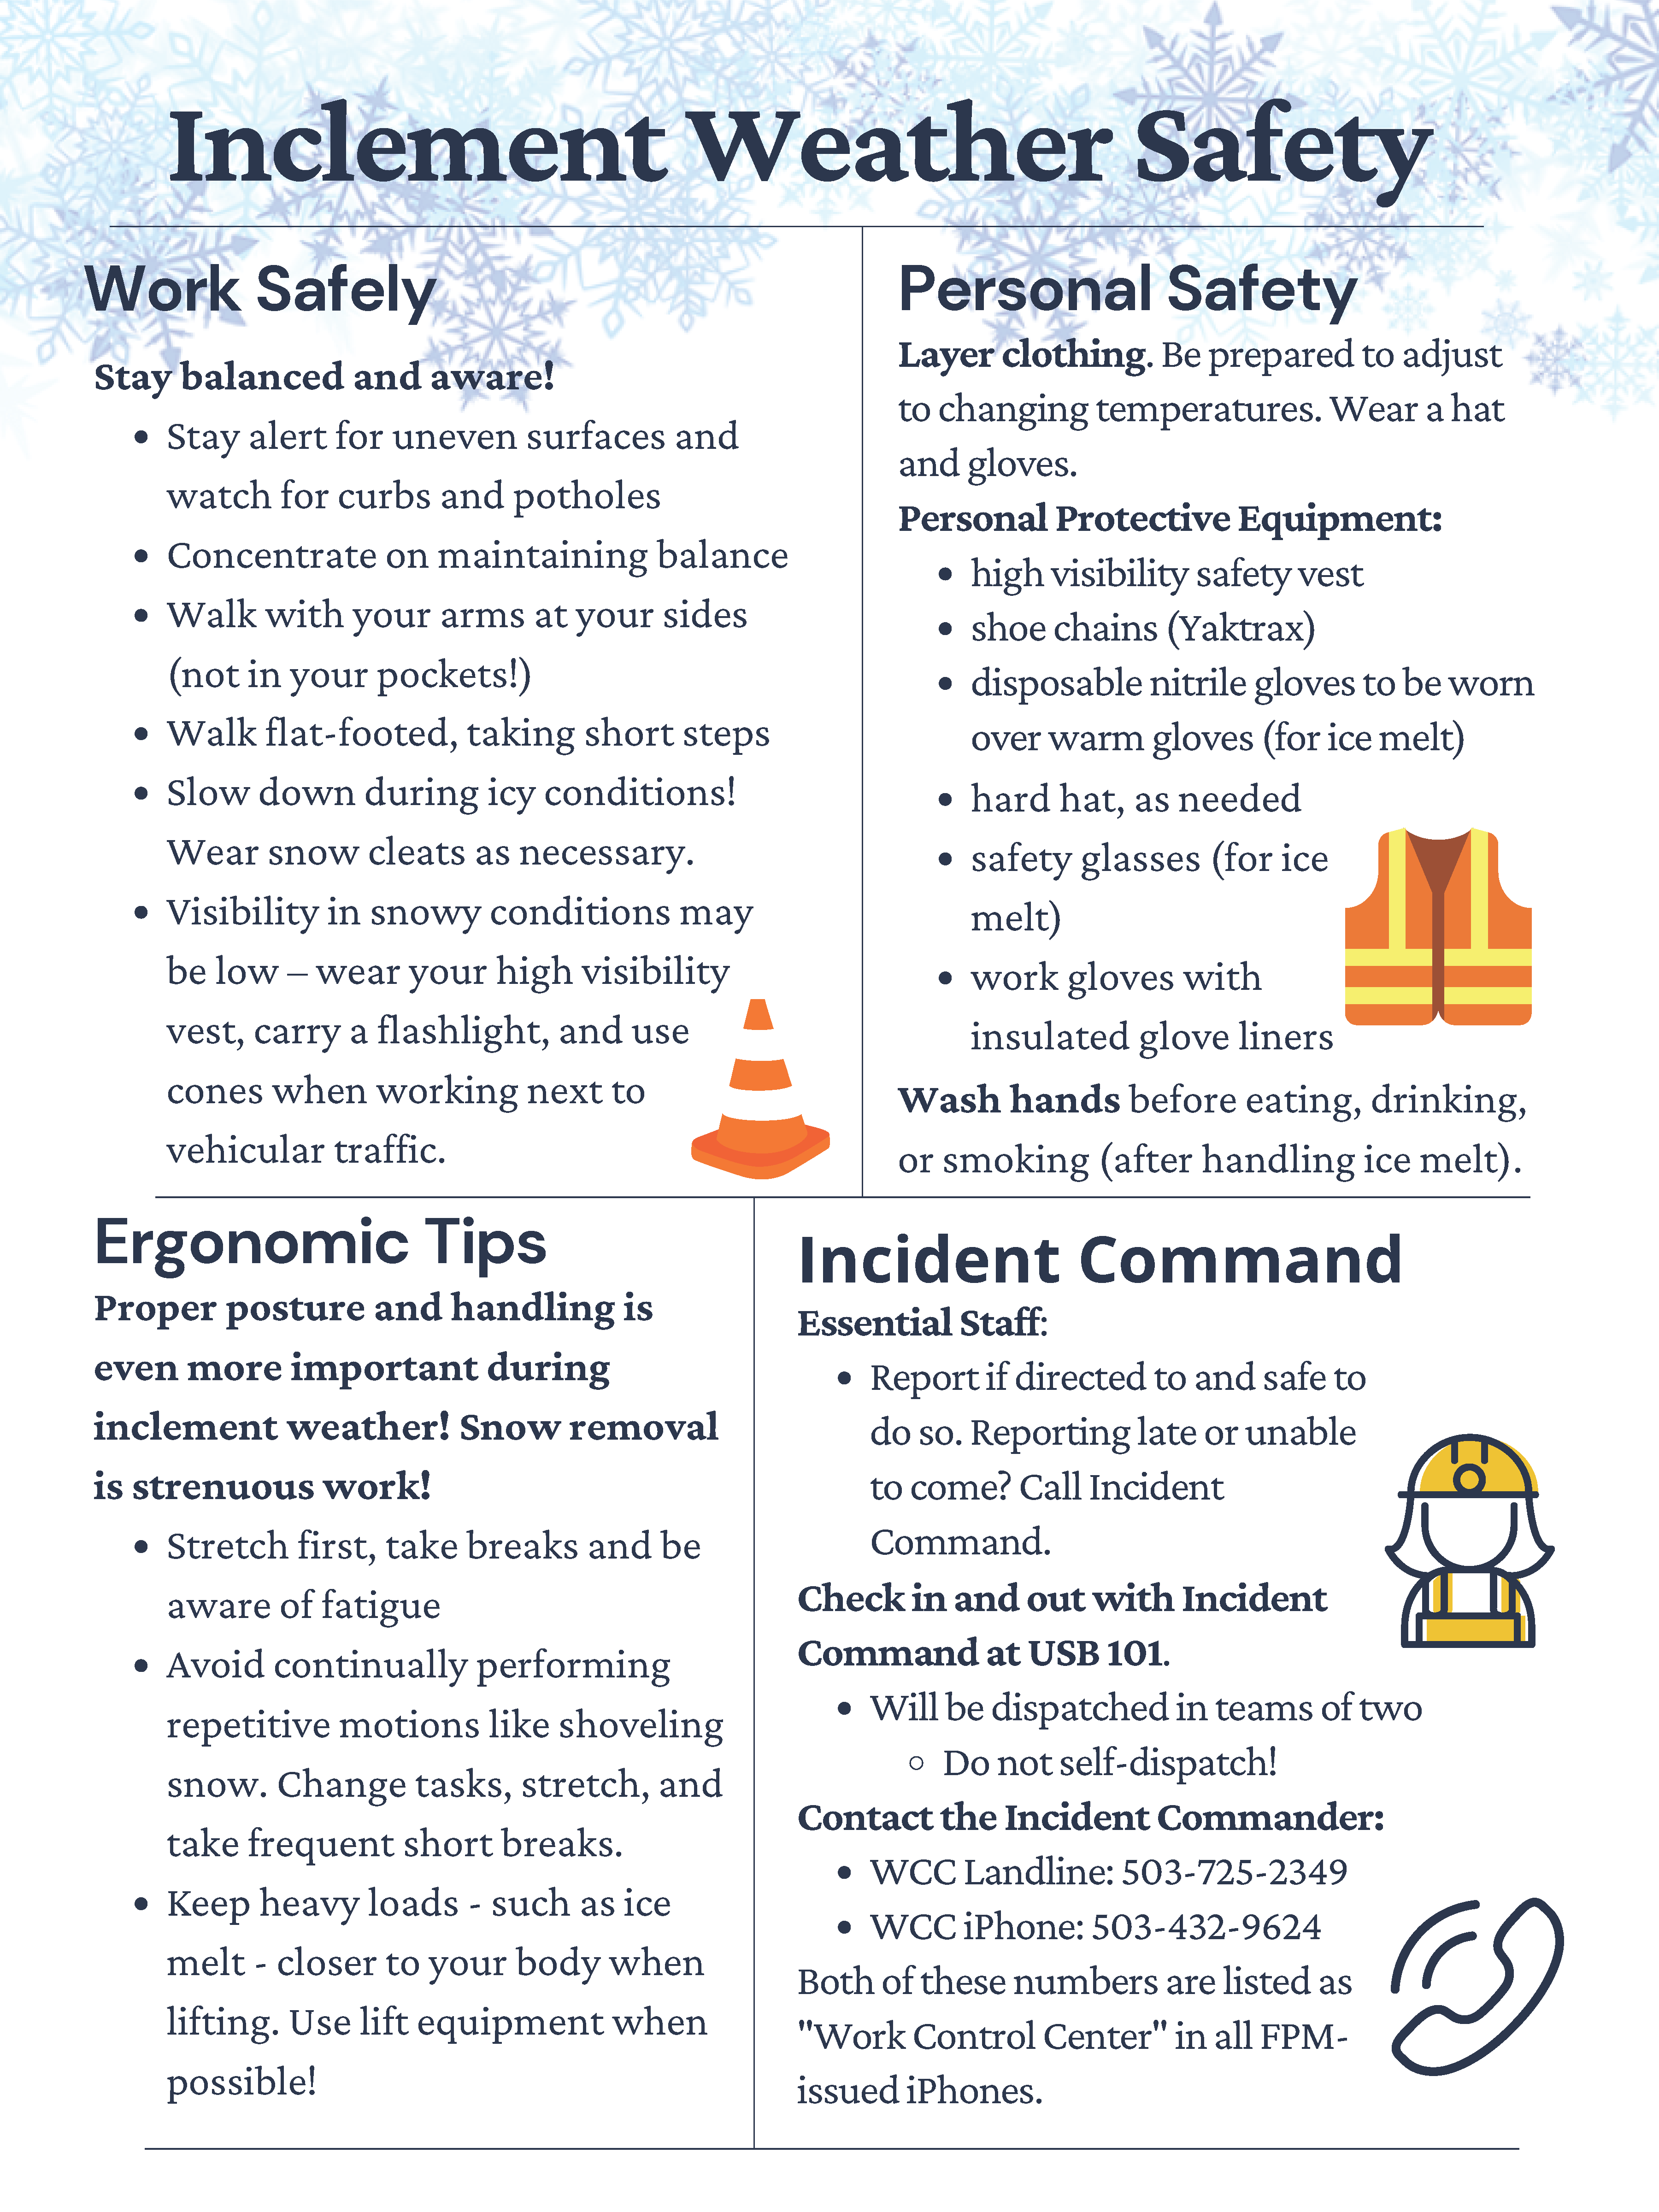 Inclement weather poster with tips and instructions for employees